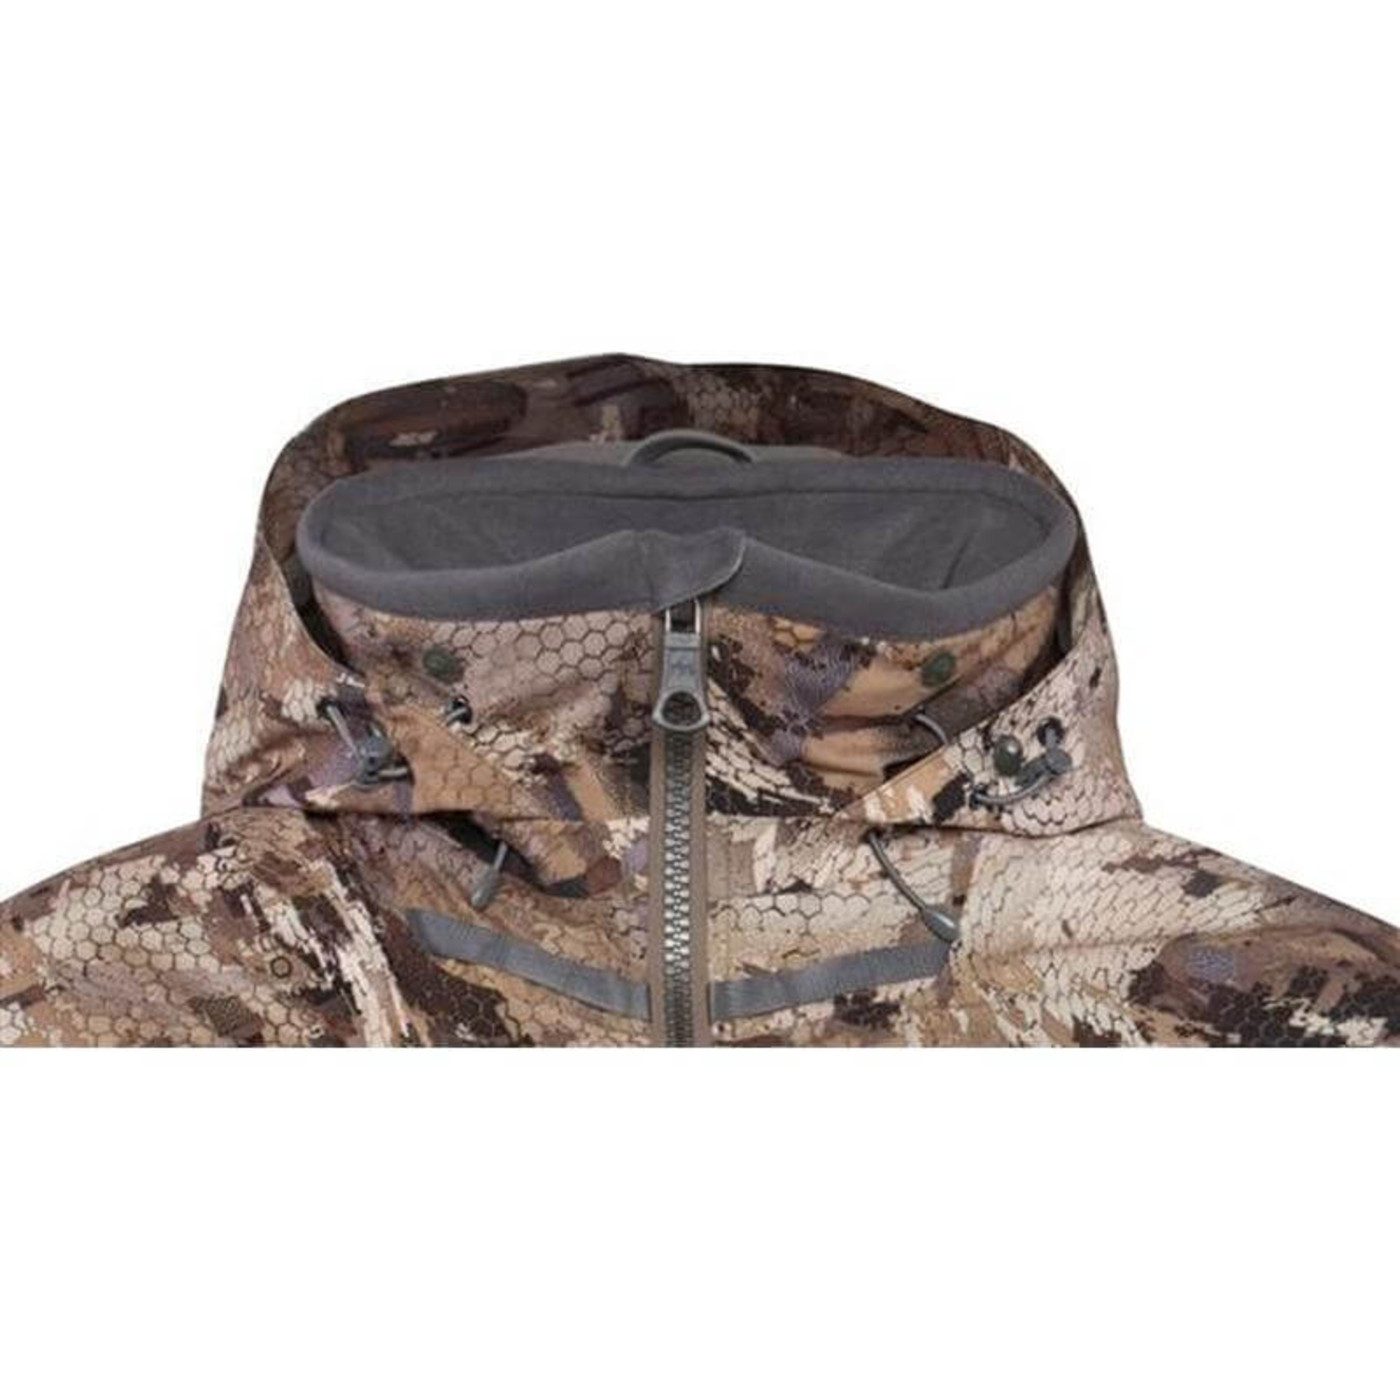 Sitka Boreal Jacket in Waterfowl Marsh Color